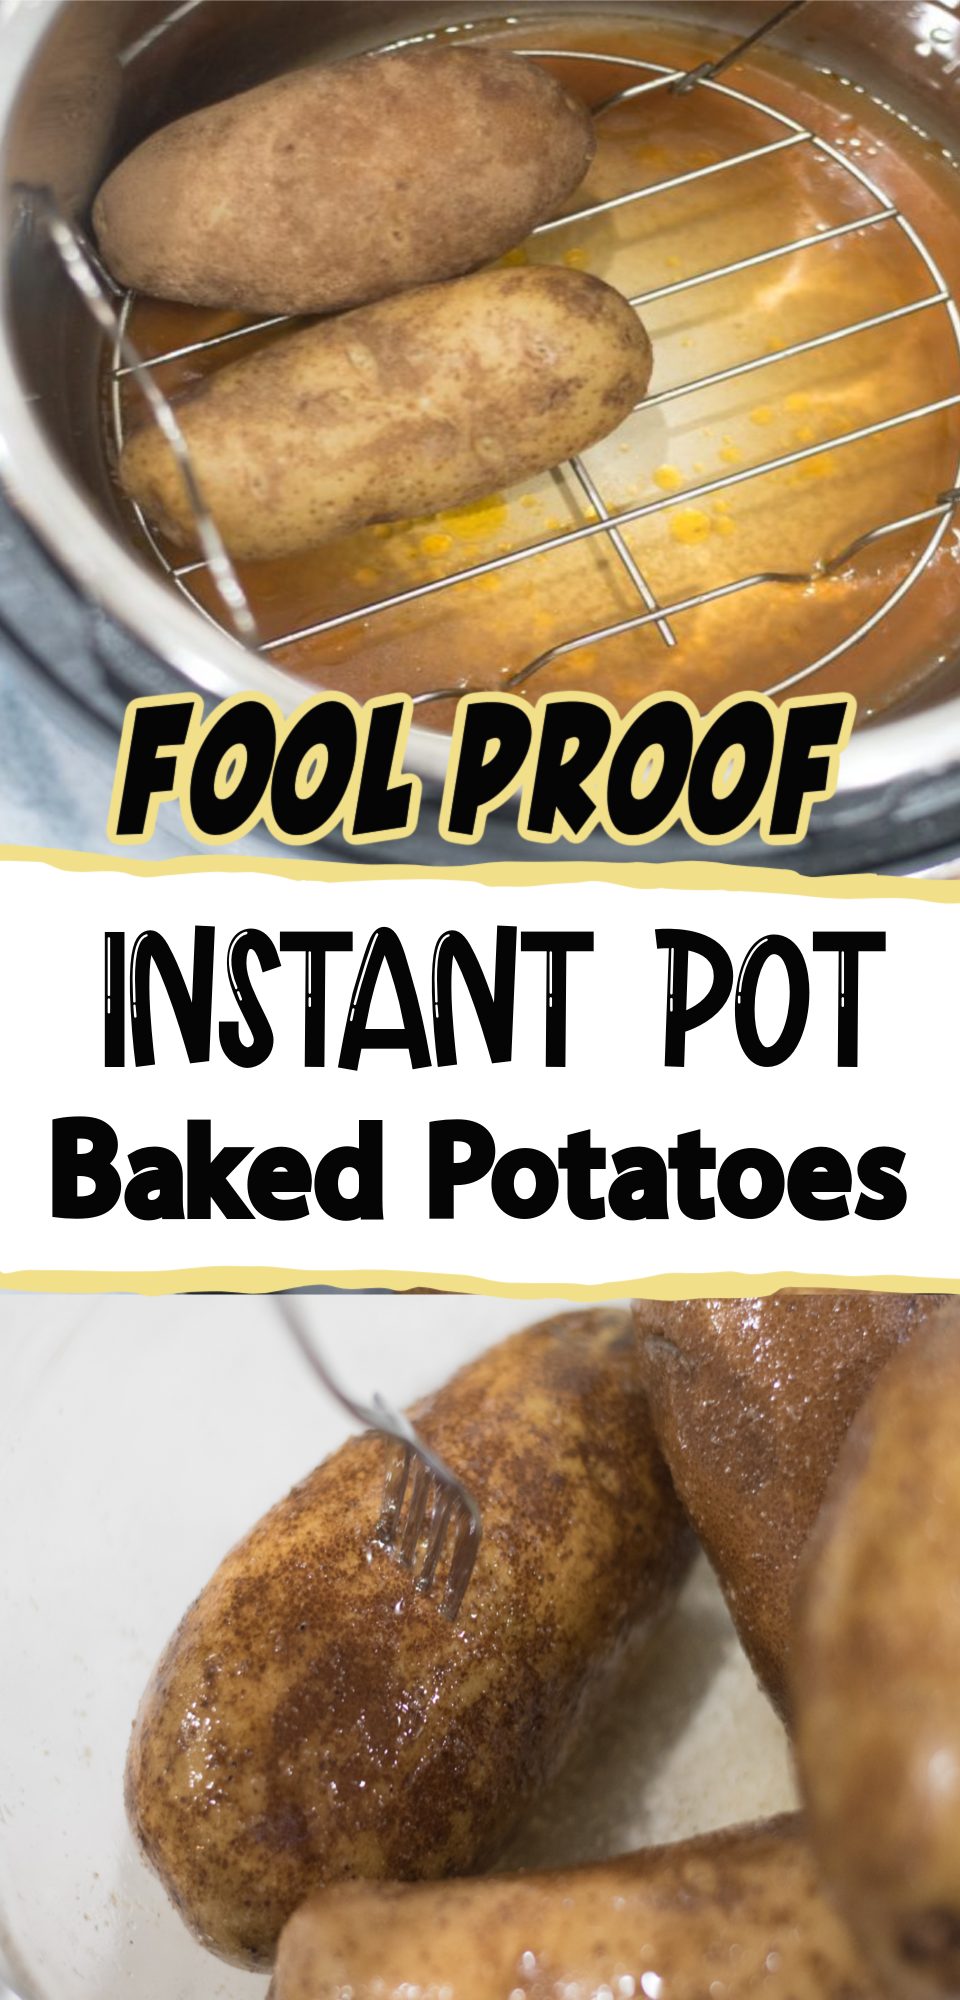 Baked Potatoes are a cheap and easy menu item that tastes delicious! And now it's even easier to make in your Instant Pot!